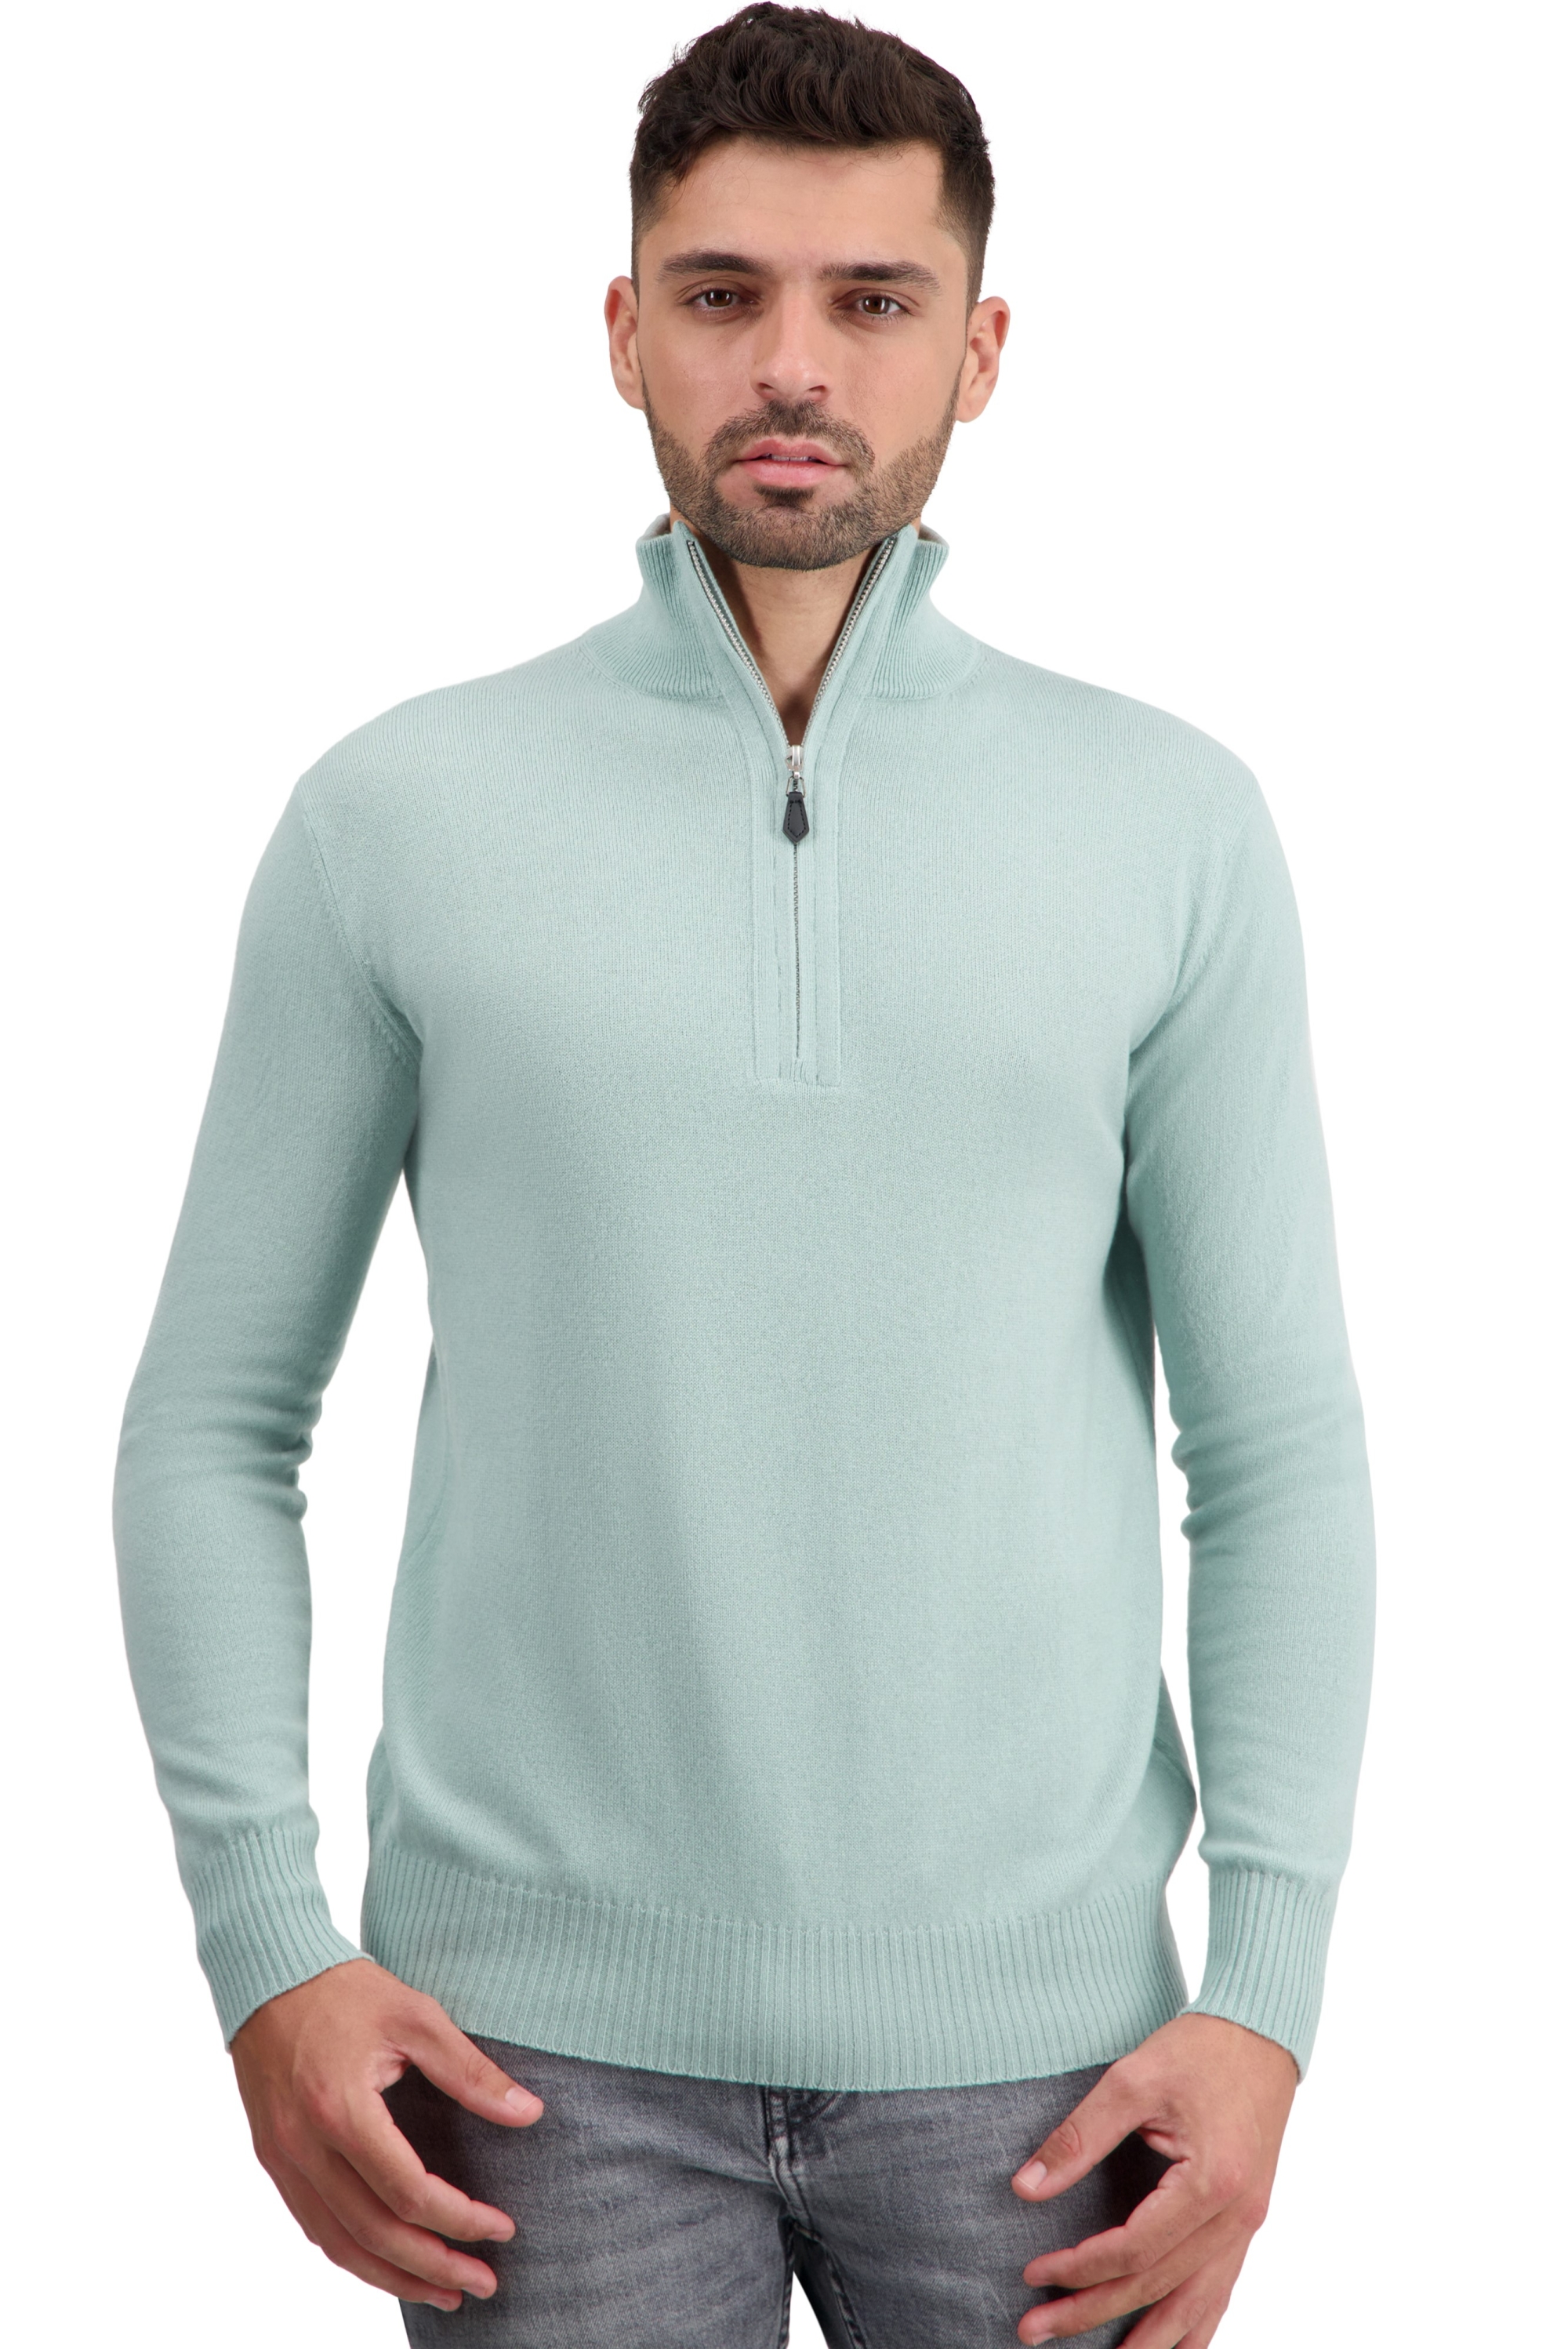 Cachemire pull homme toulon first sea foam 2xl